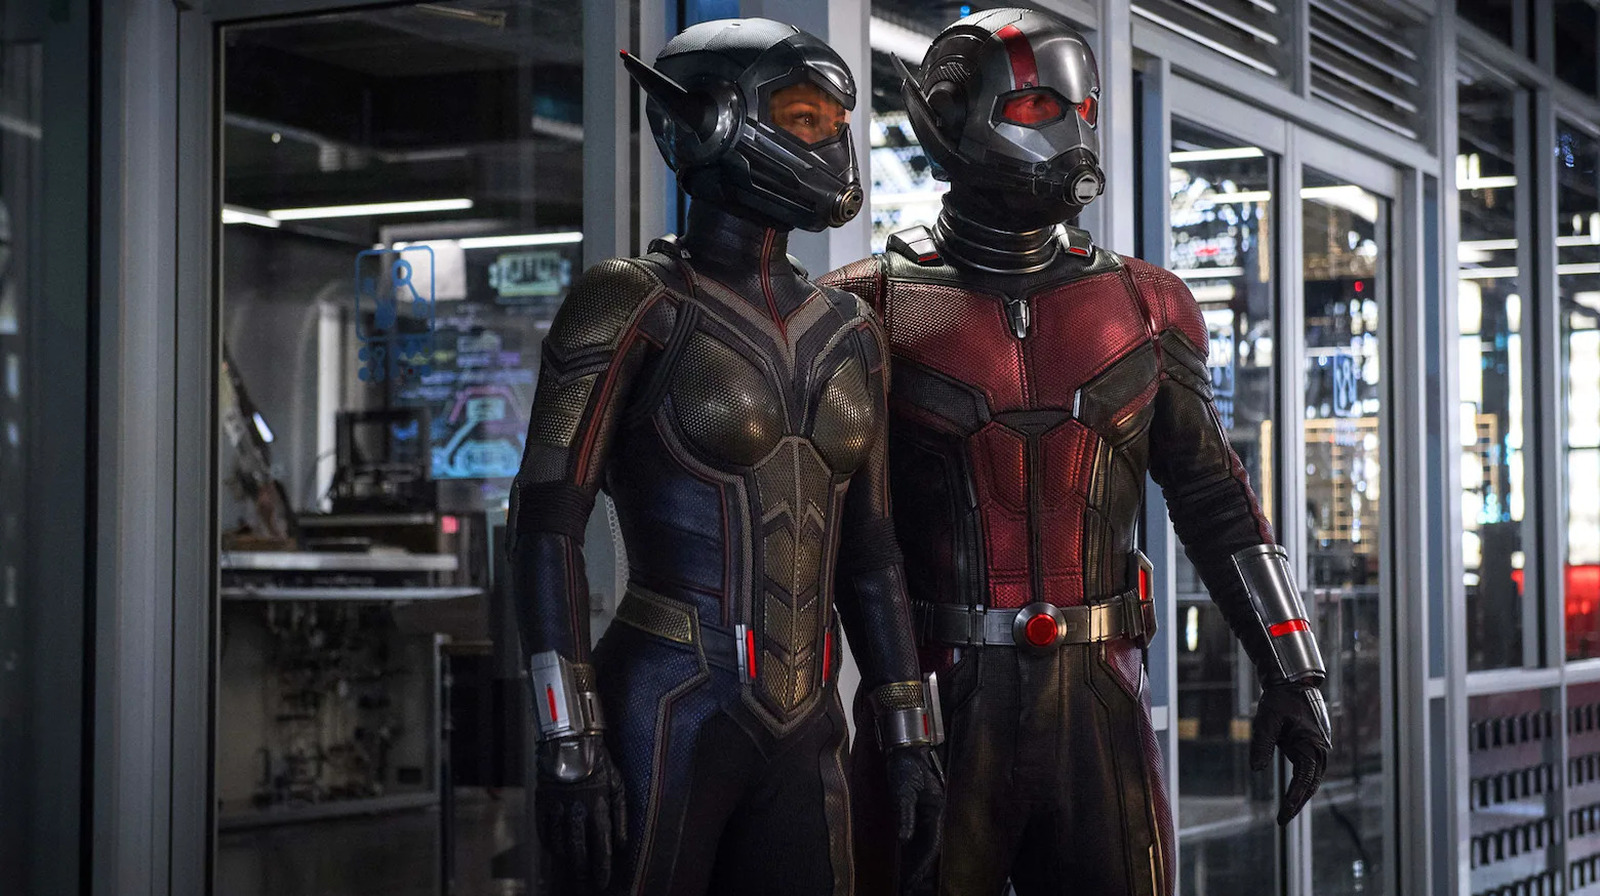 Making of 'Ant-Man 4': Probably Going to Surprise Some People